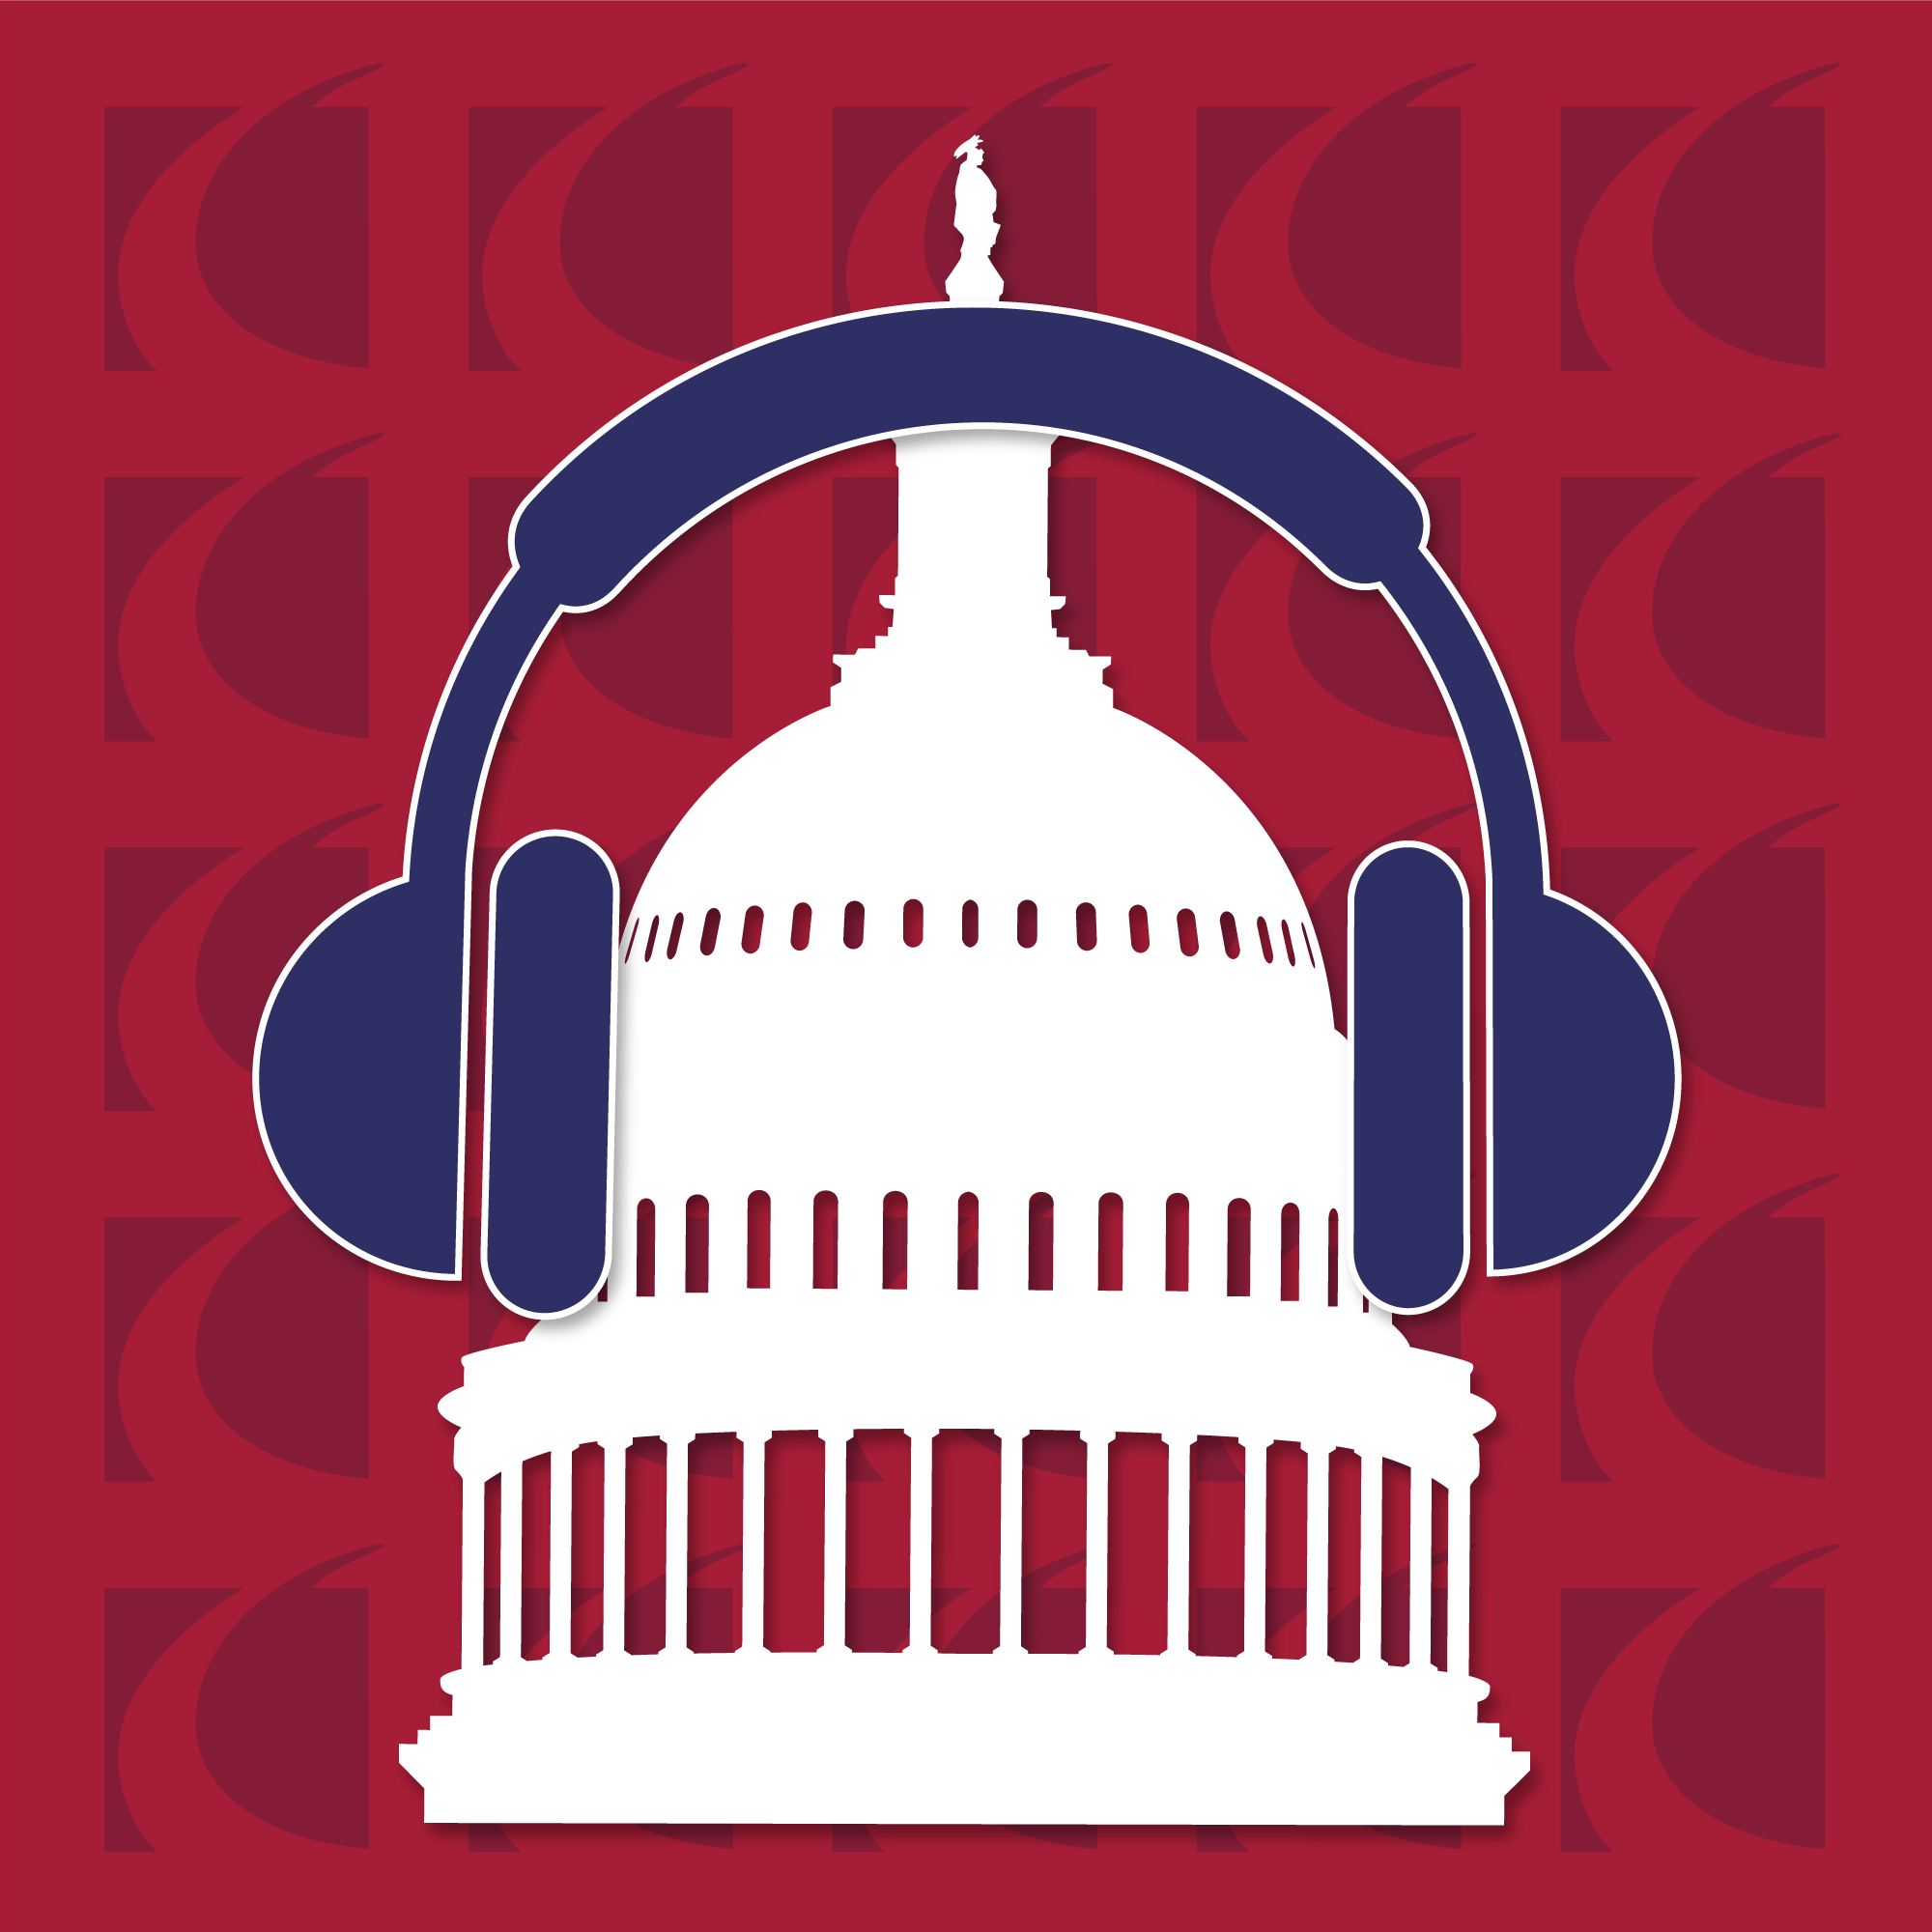 July 15: Fastest 5 Minutes, The Podcast Gov’t Contractors Can’t Do Without - Crowell & Moring LLP